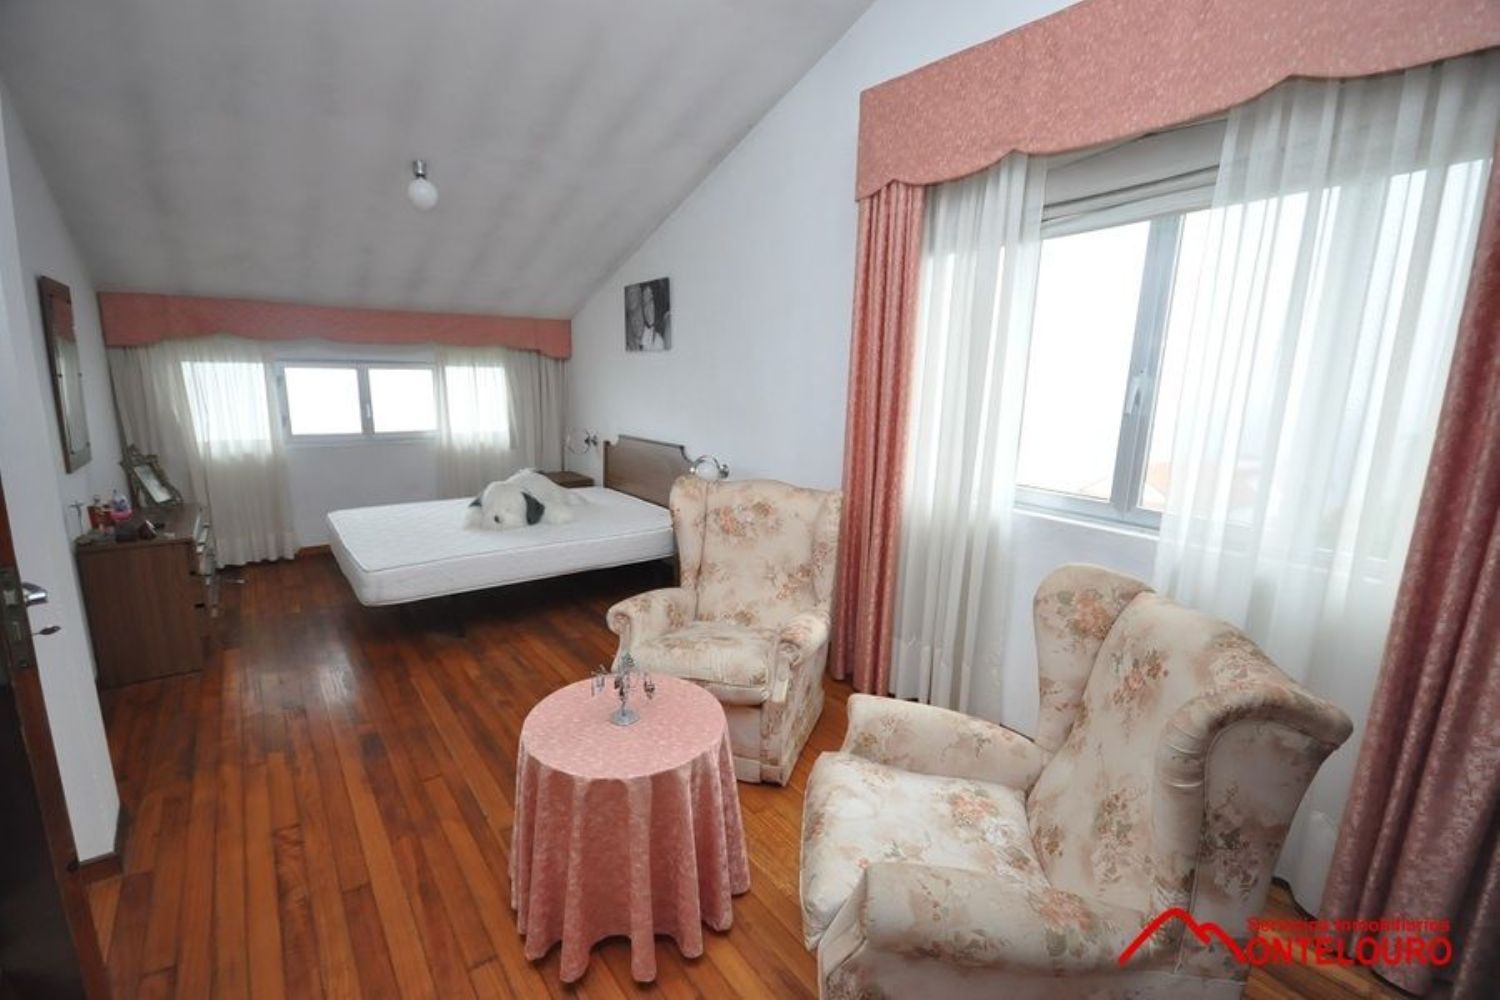 House for sale on the seafront on Calle Do Rebordiño, in Muros